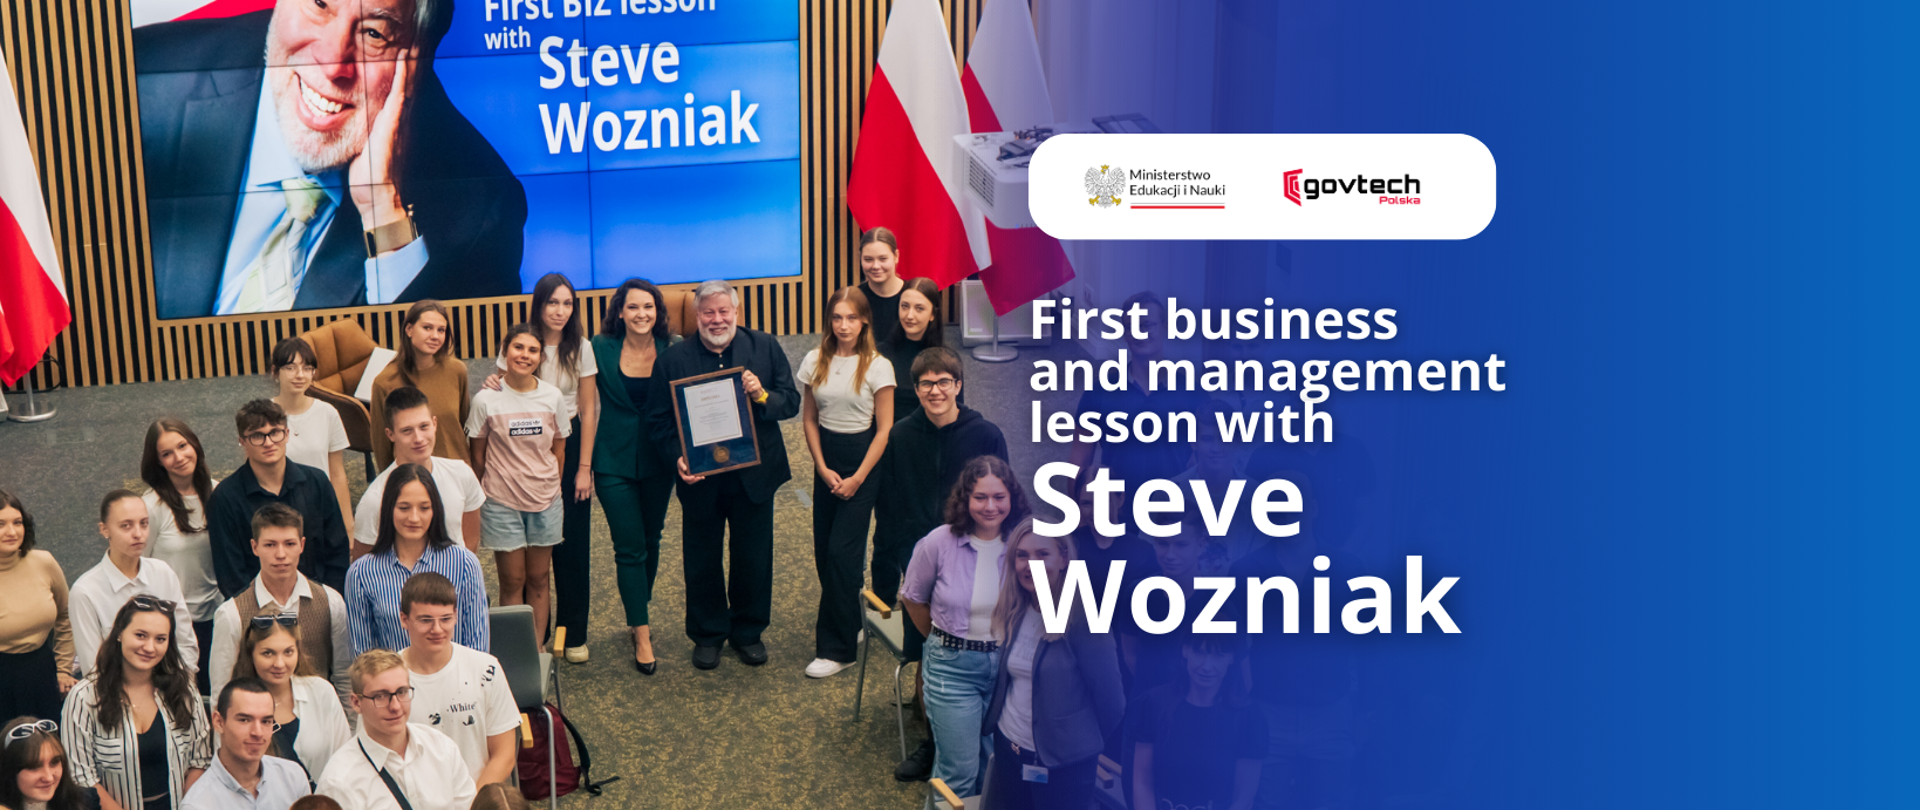 First business and management lesson with Steve
Wozniak